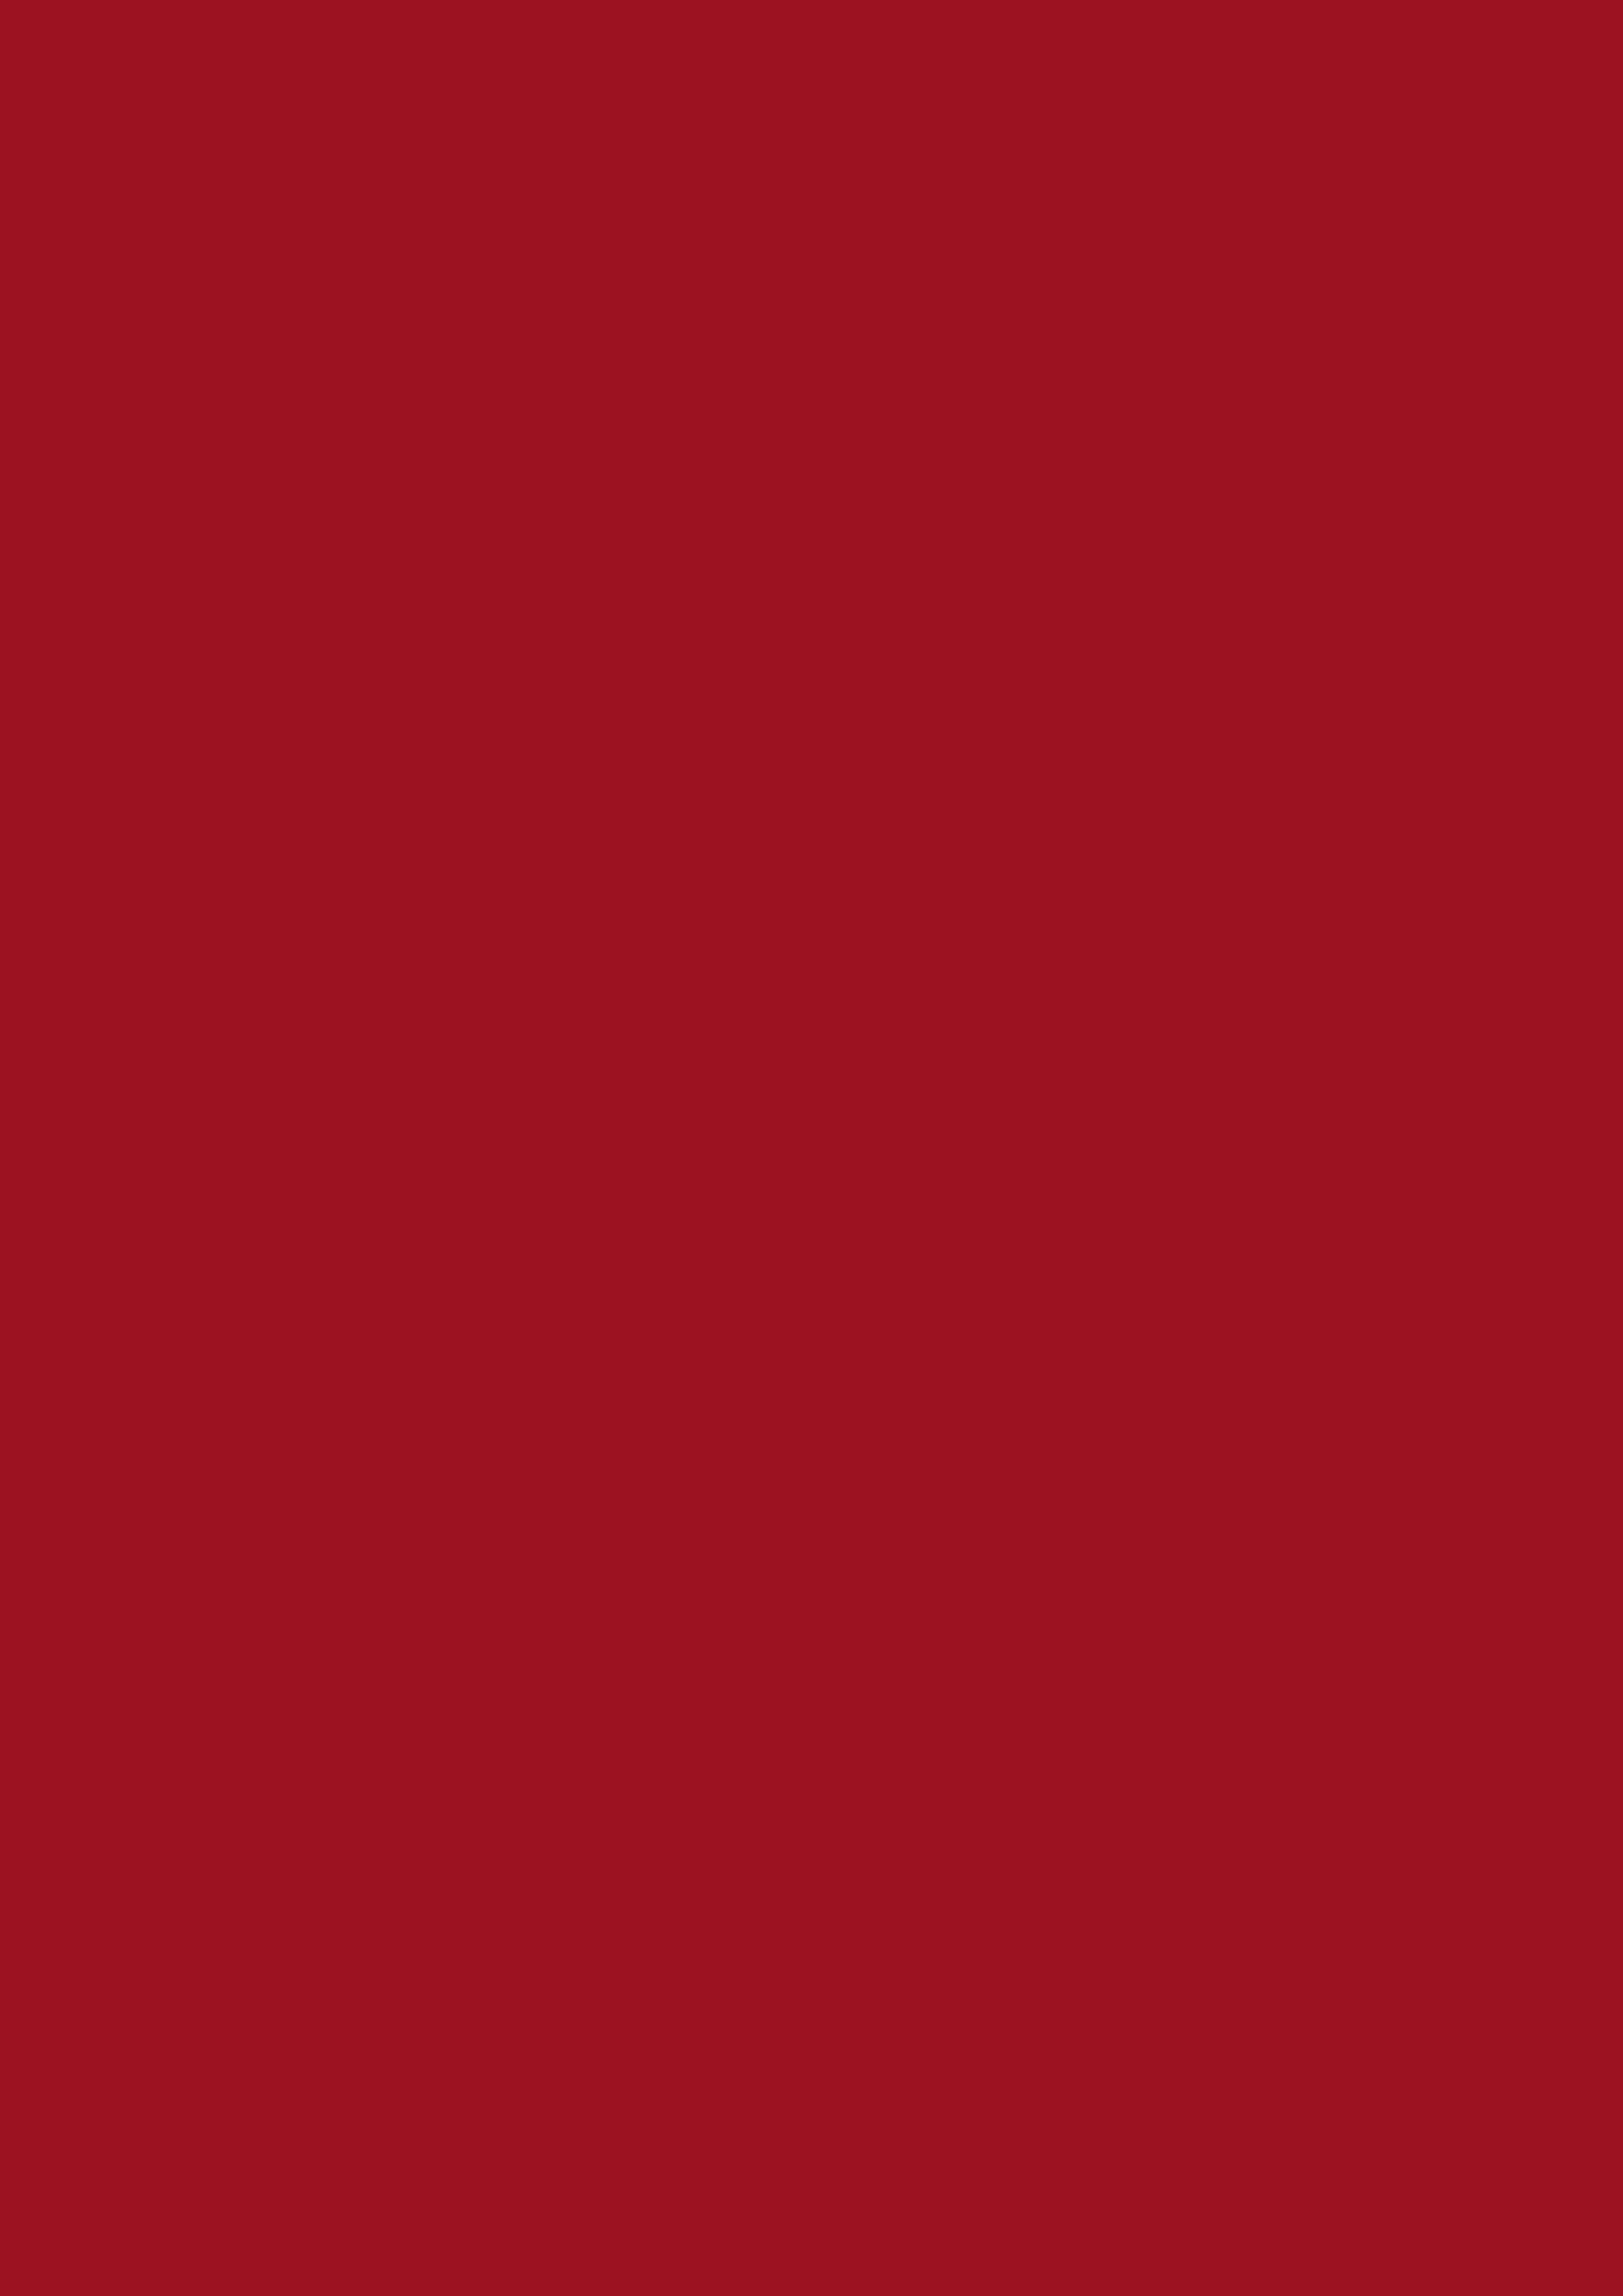 2480x3508 Ruby Red Solid Color Background